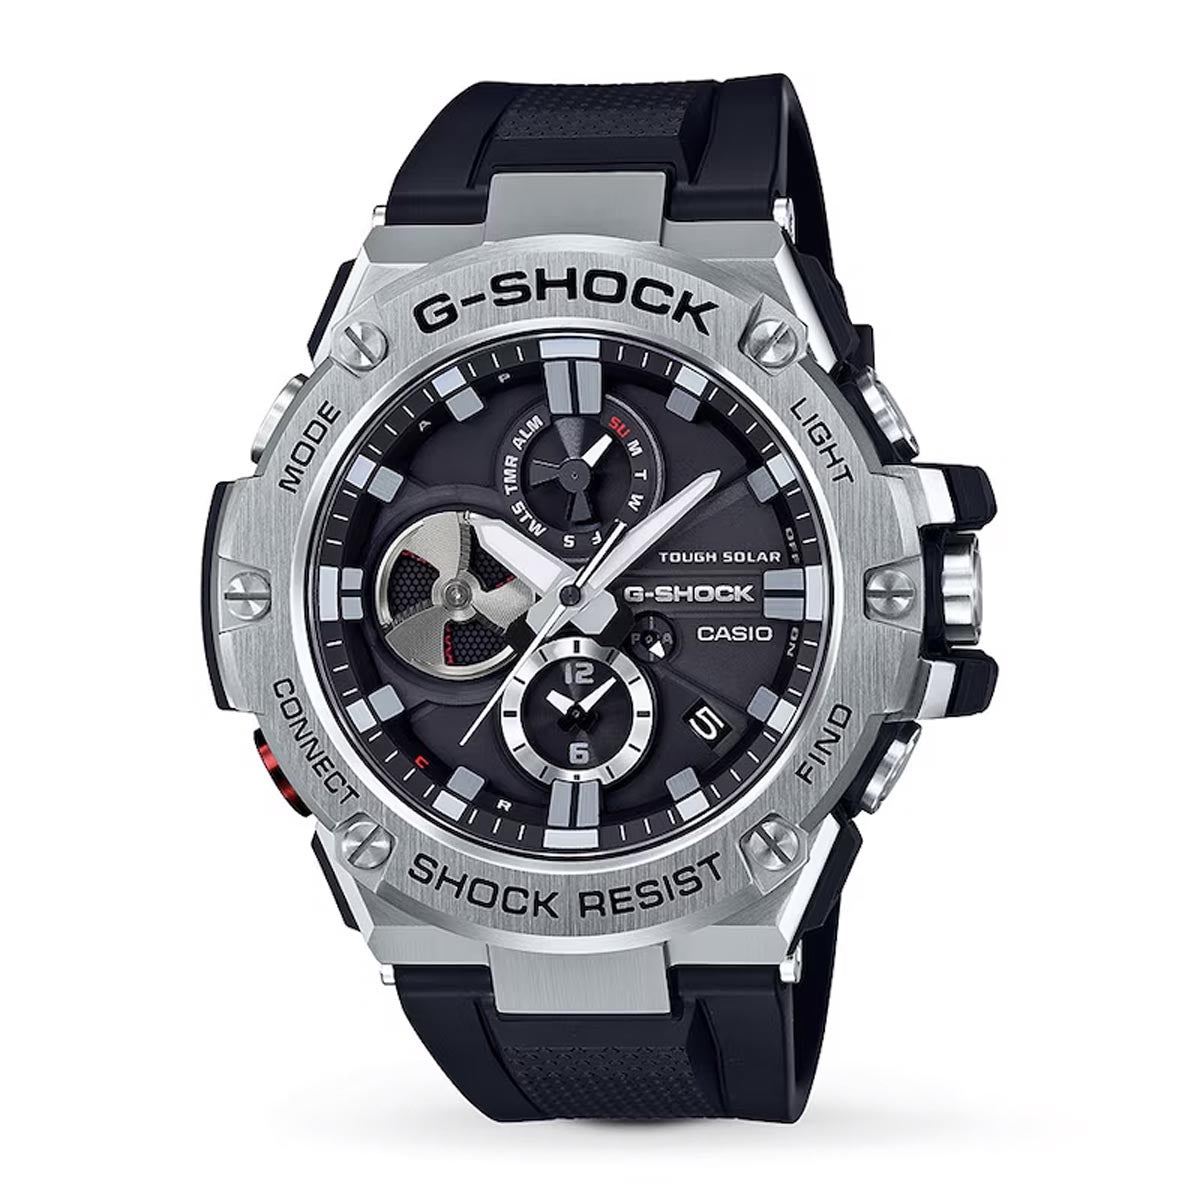 G-Shock GST-B100 Series Men's Watch with Black Dial and Black Resin Strap (solar movement)